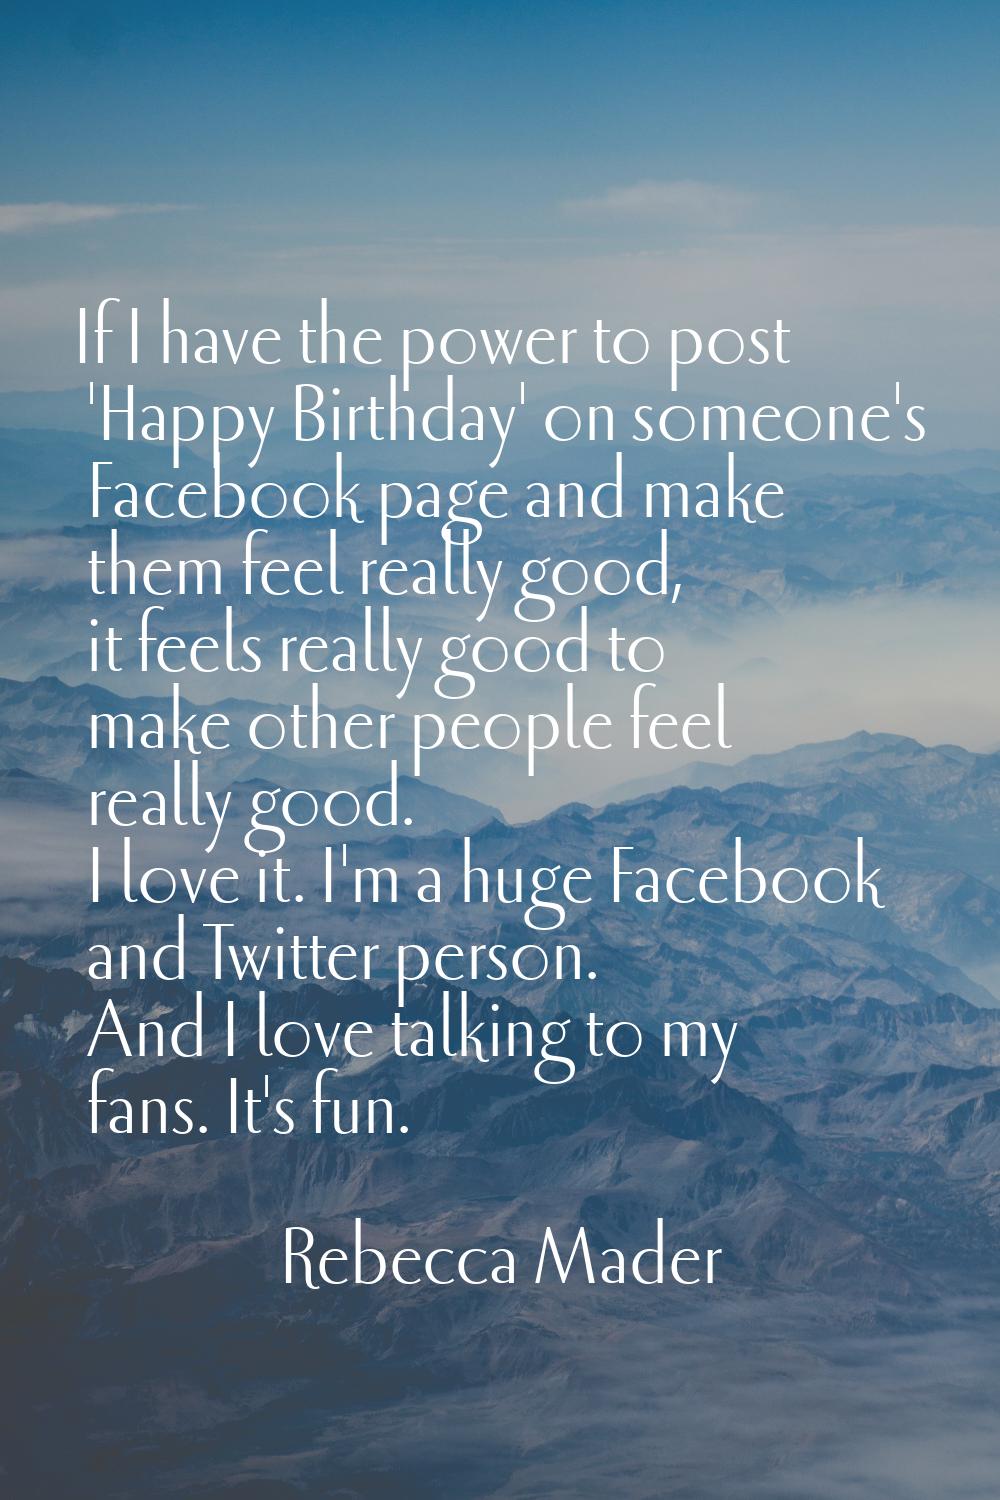 If I have the power to post 'Happy Birthday' on someone's Facebook page and make them feel really g